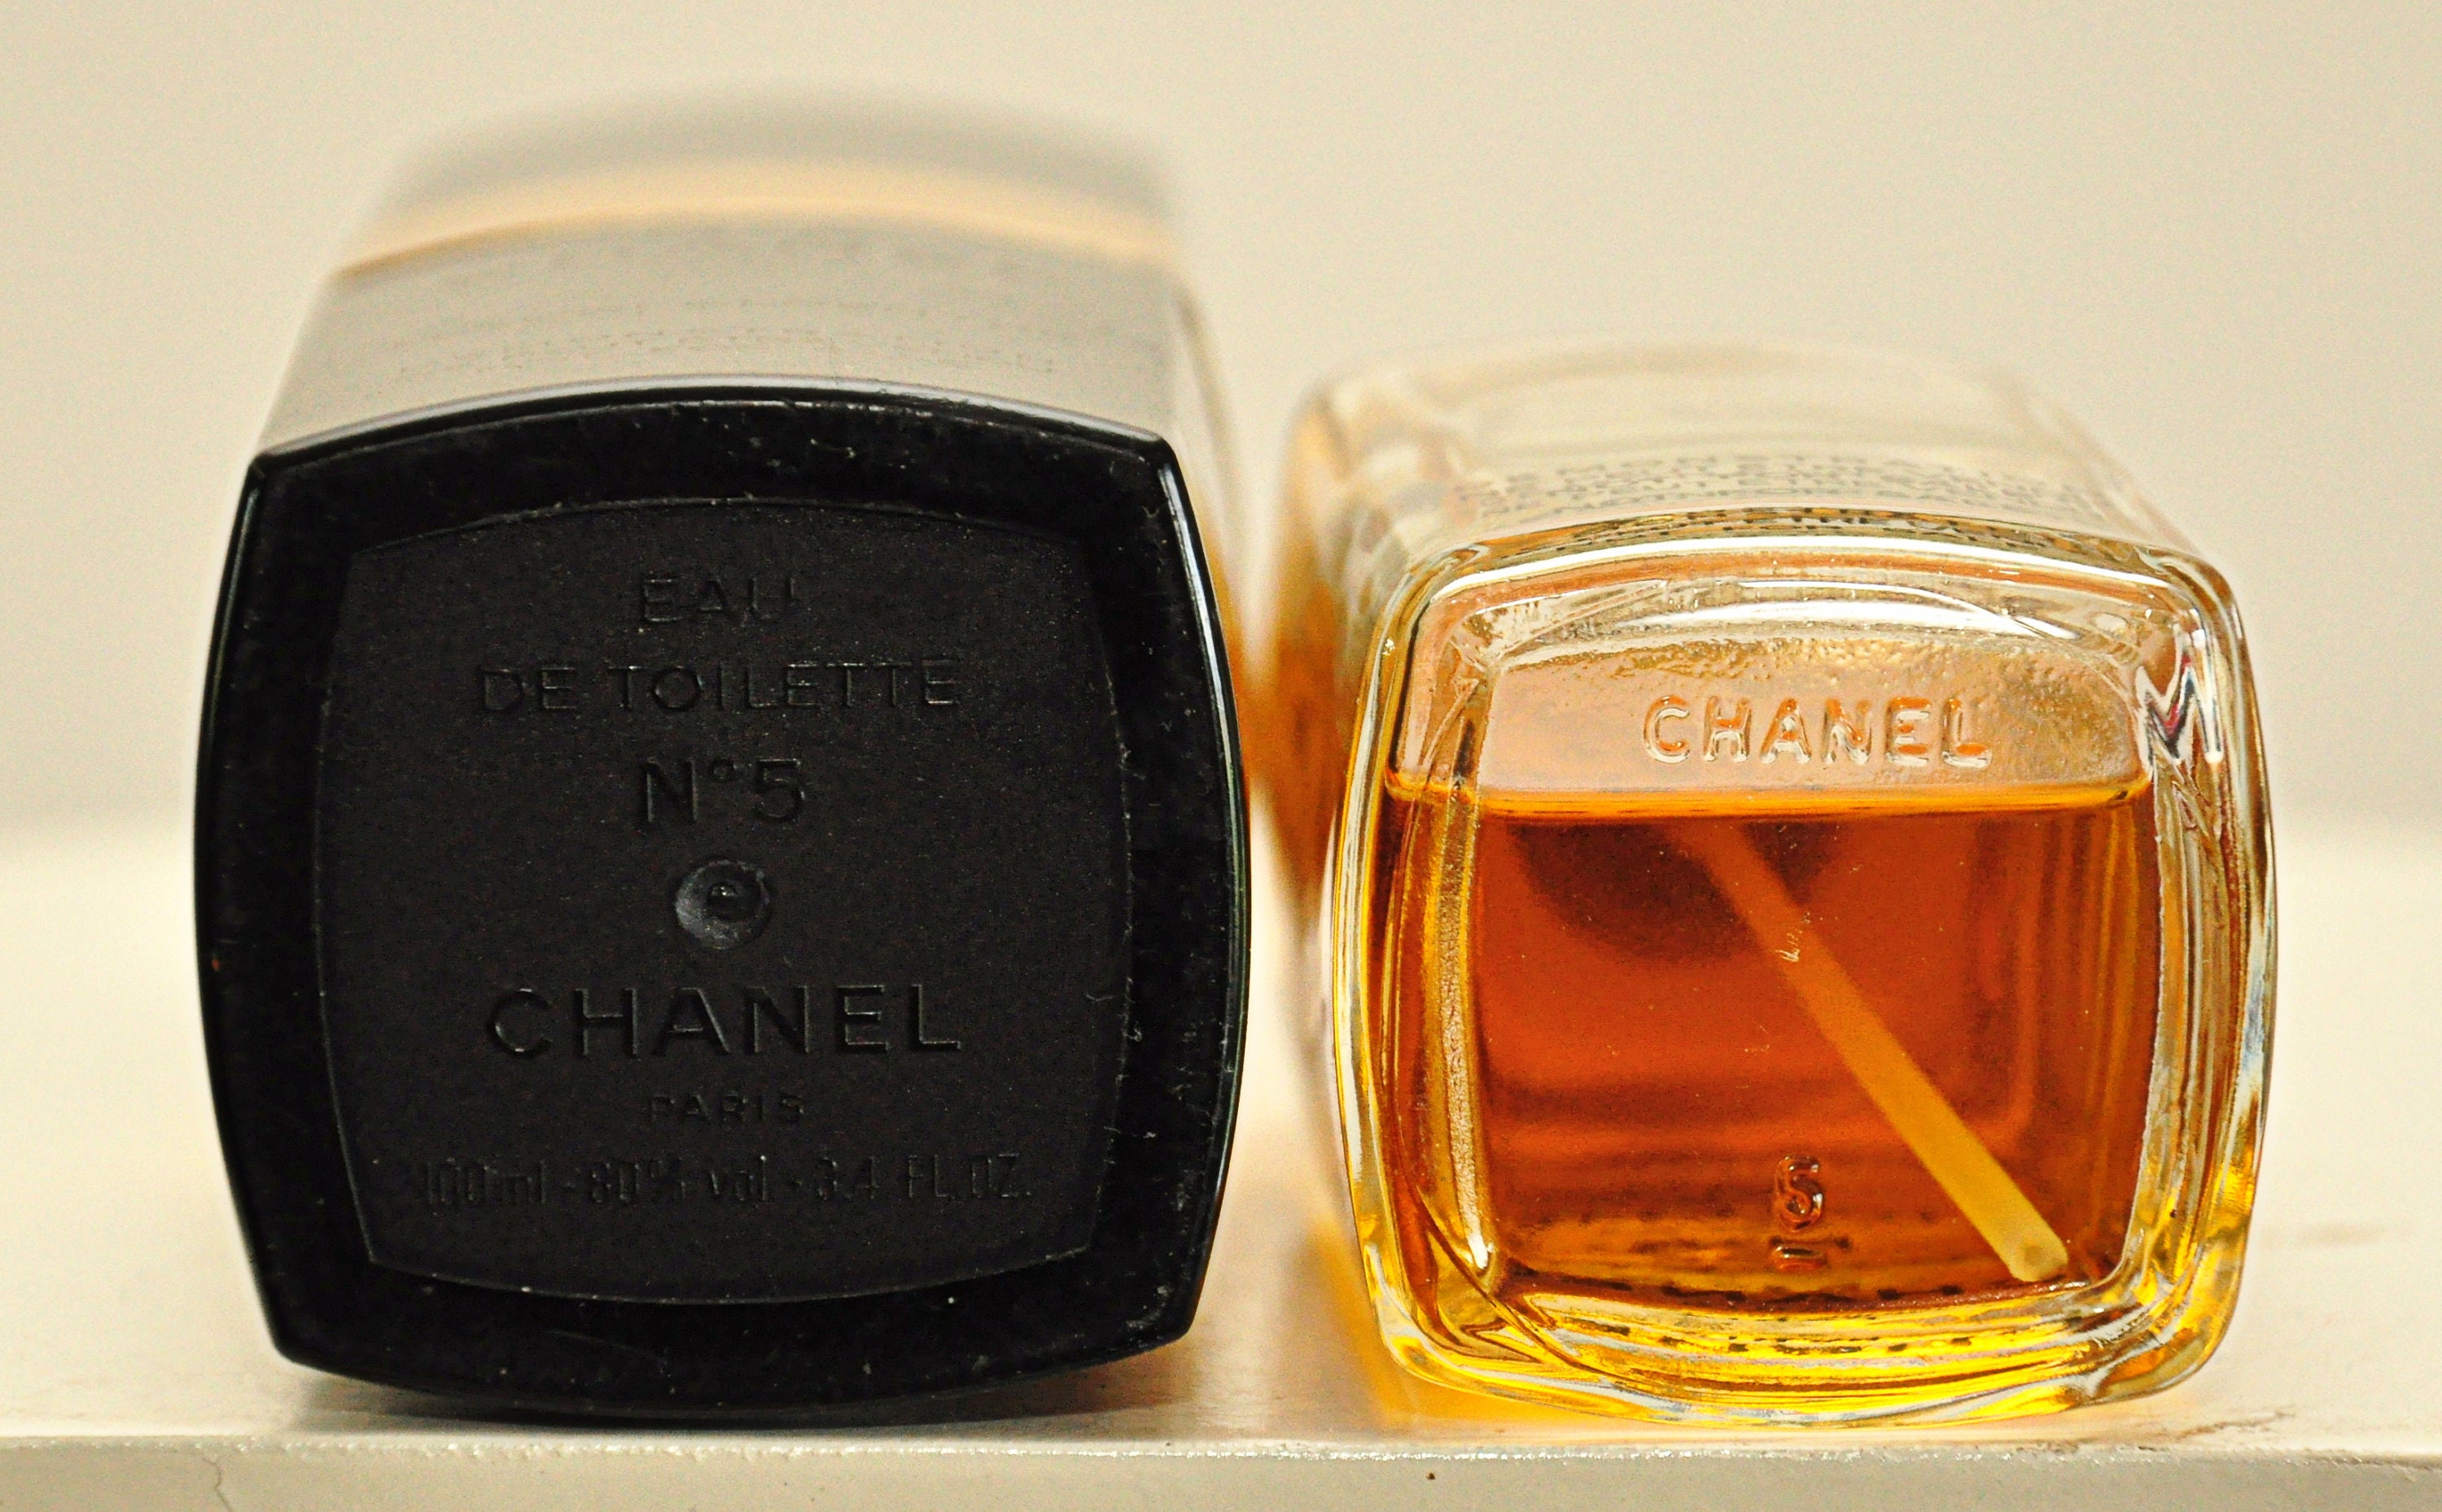 Chanel No.5 Spray And Pearl Jewelry by Sandi OReilly